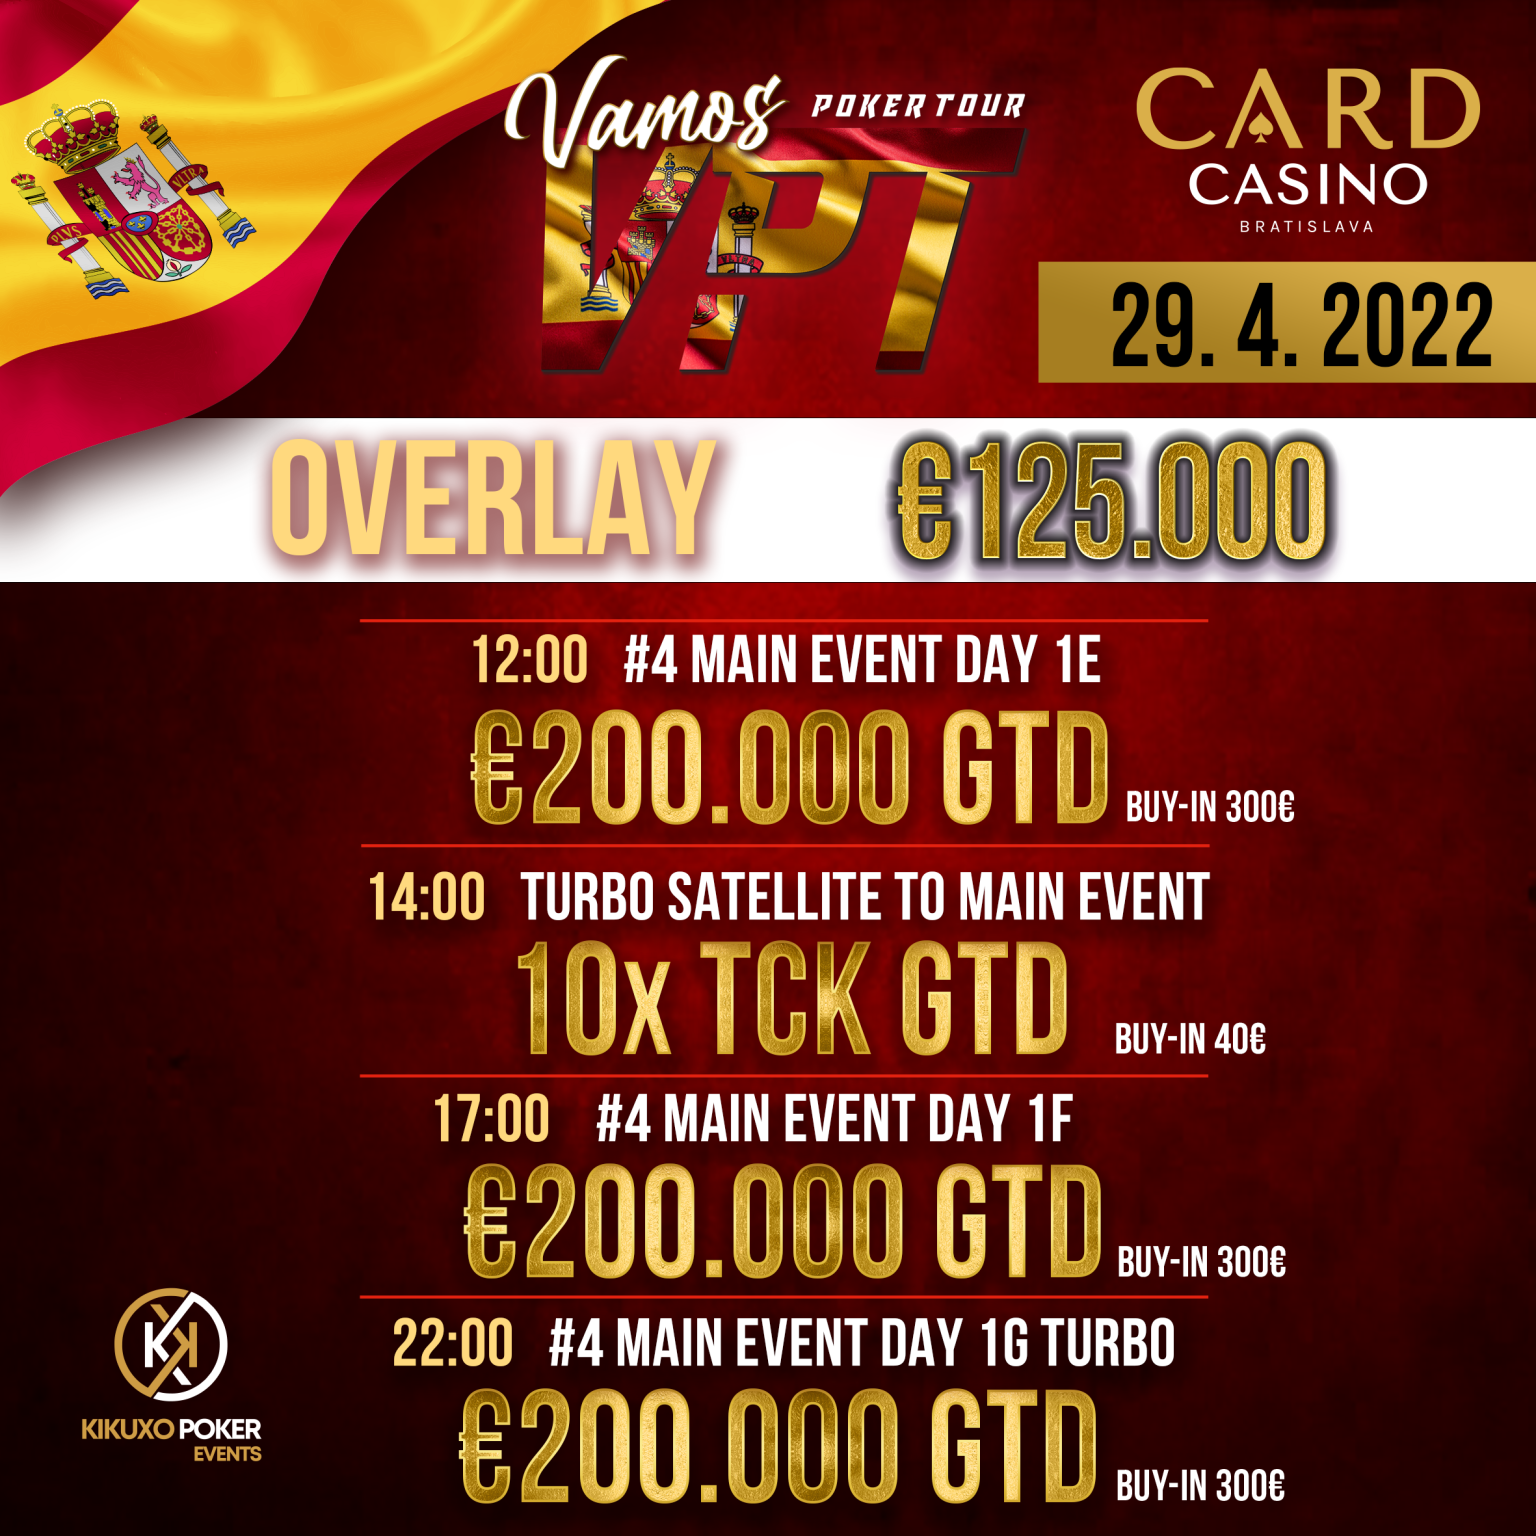 Spanish VPT tunes up for WPT Worlds in April with €350,000.